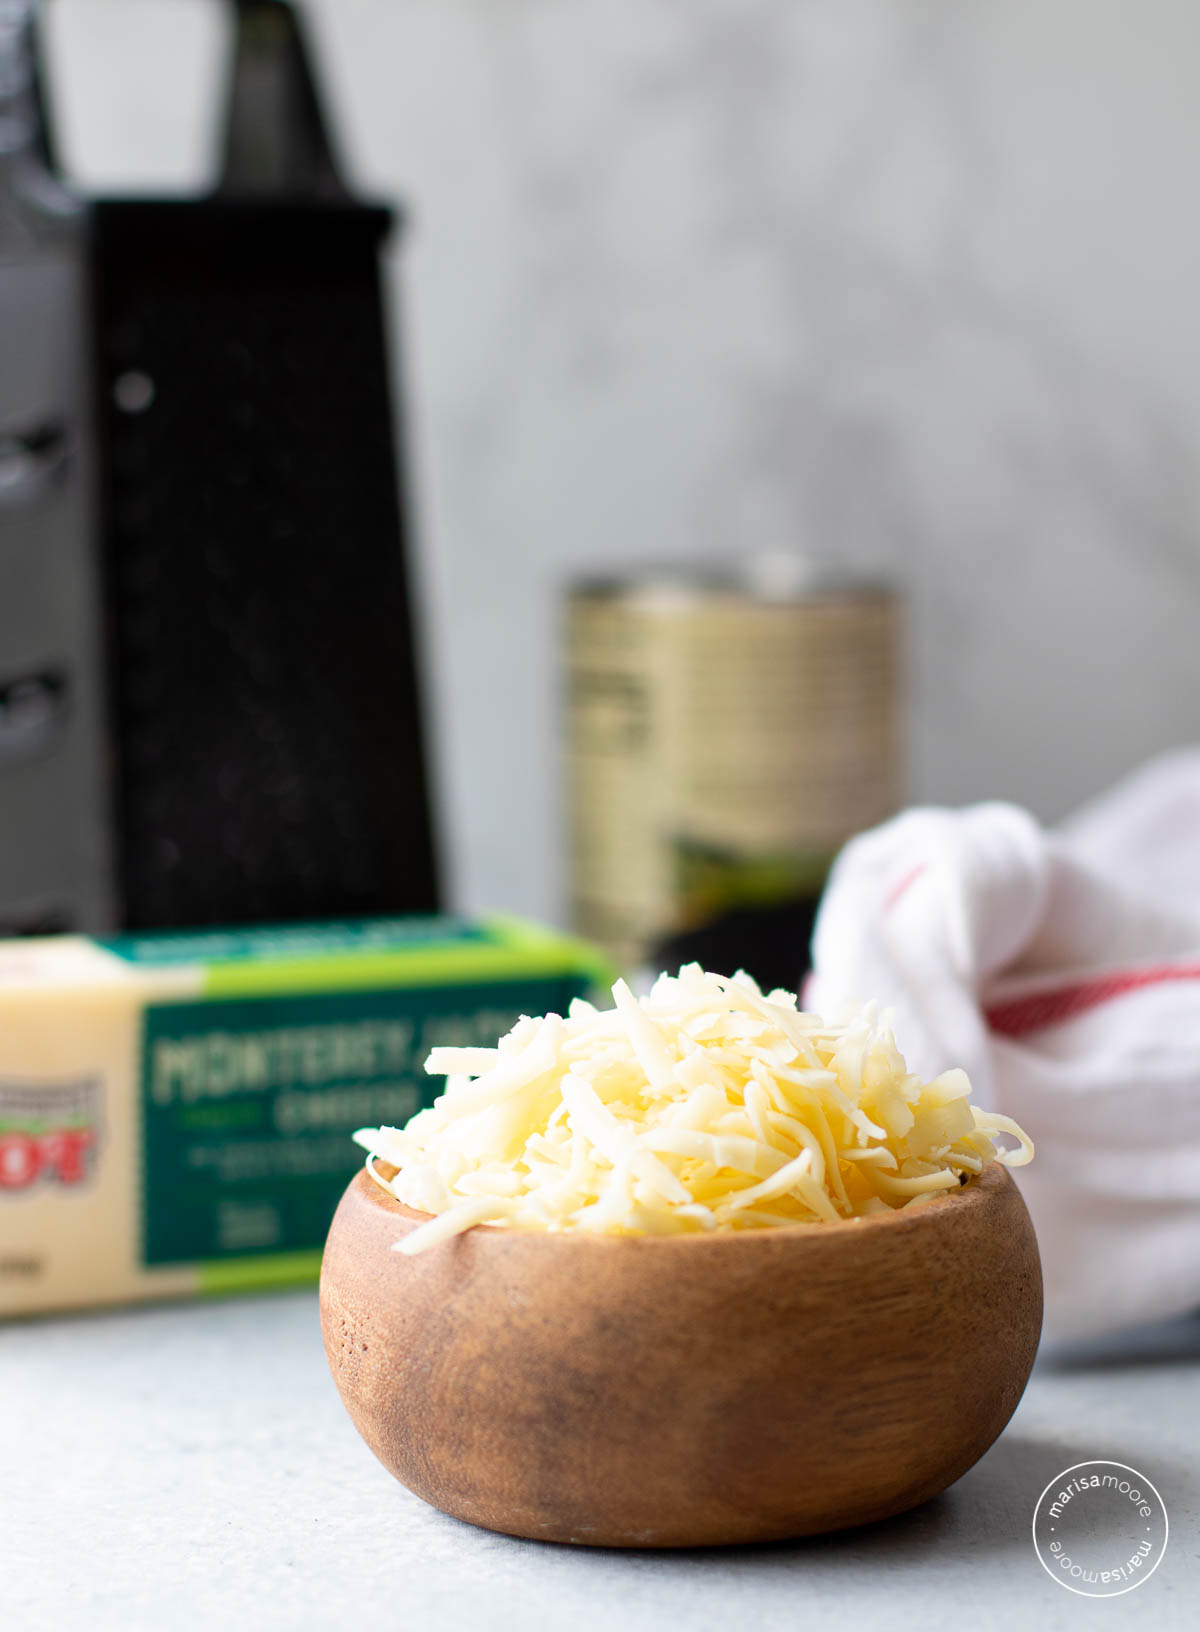 Wooden bowl filled with shredded cheese and a block of cheese and a grater in the background